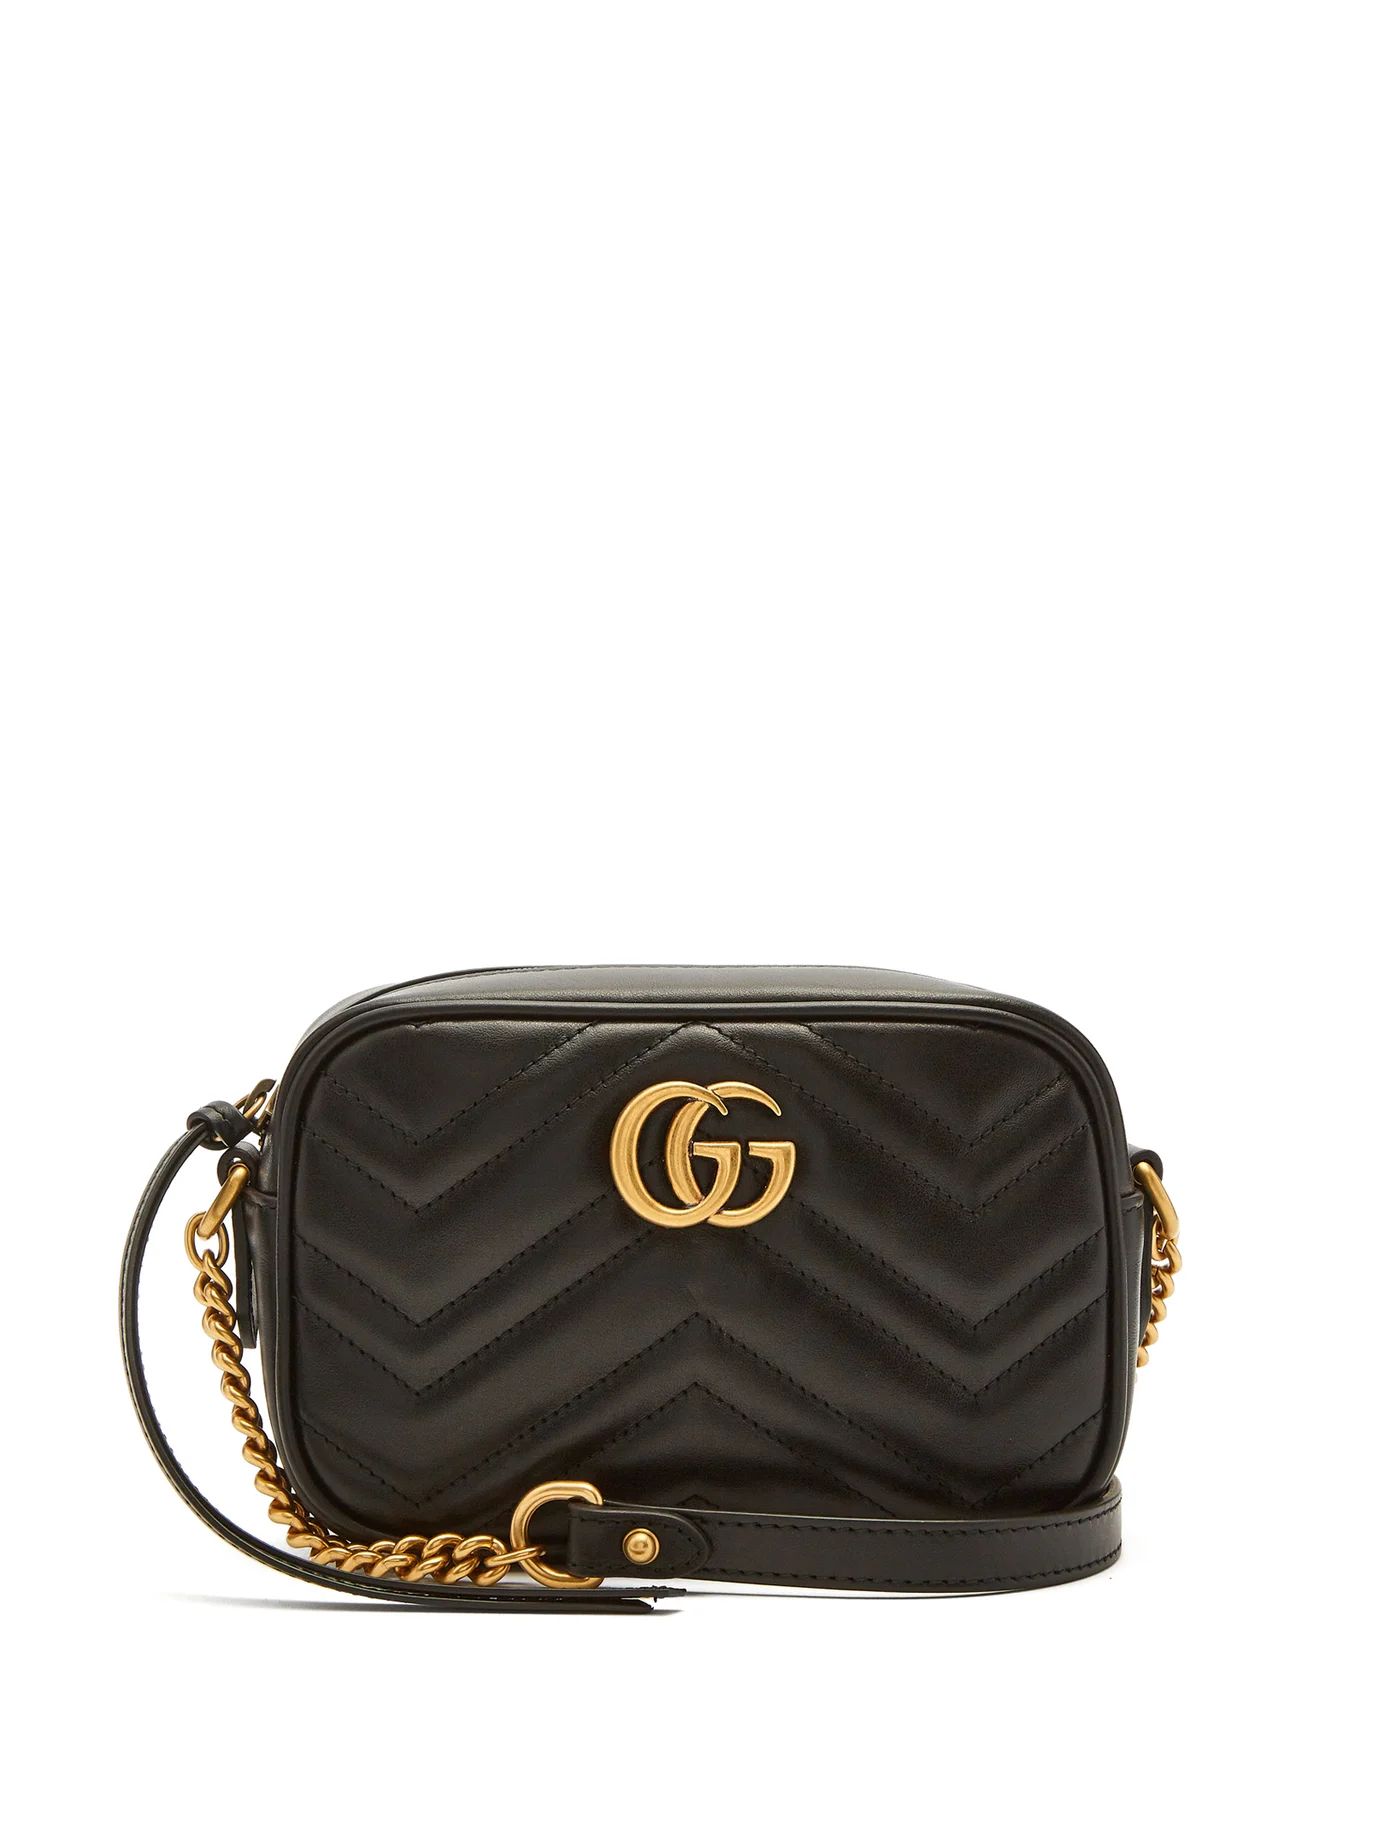 GG Marmont mini quilted-leather cross-body bag | Matches (US)